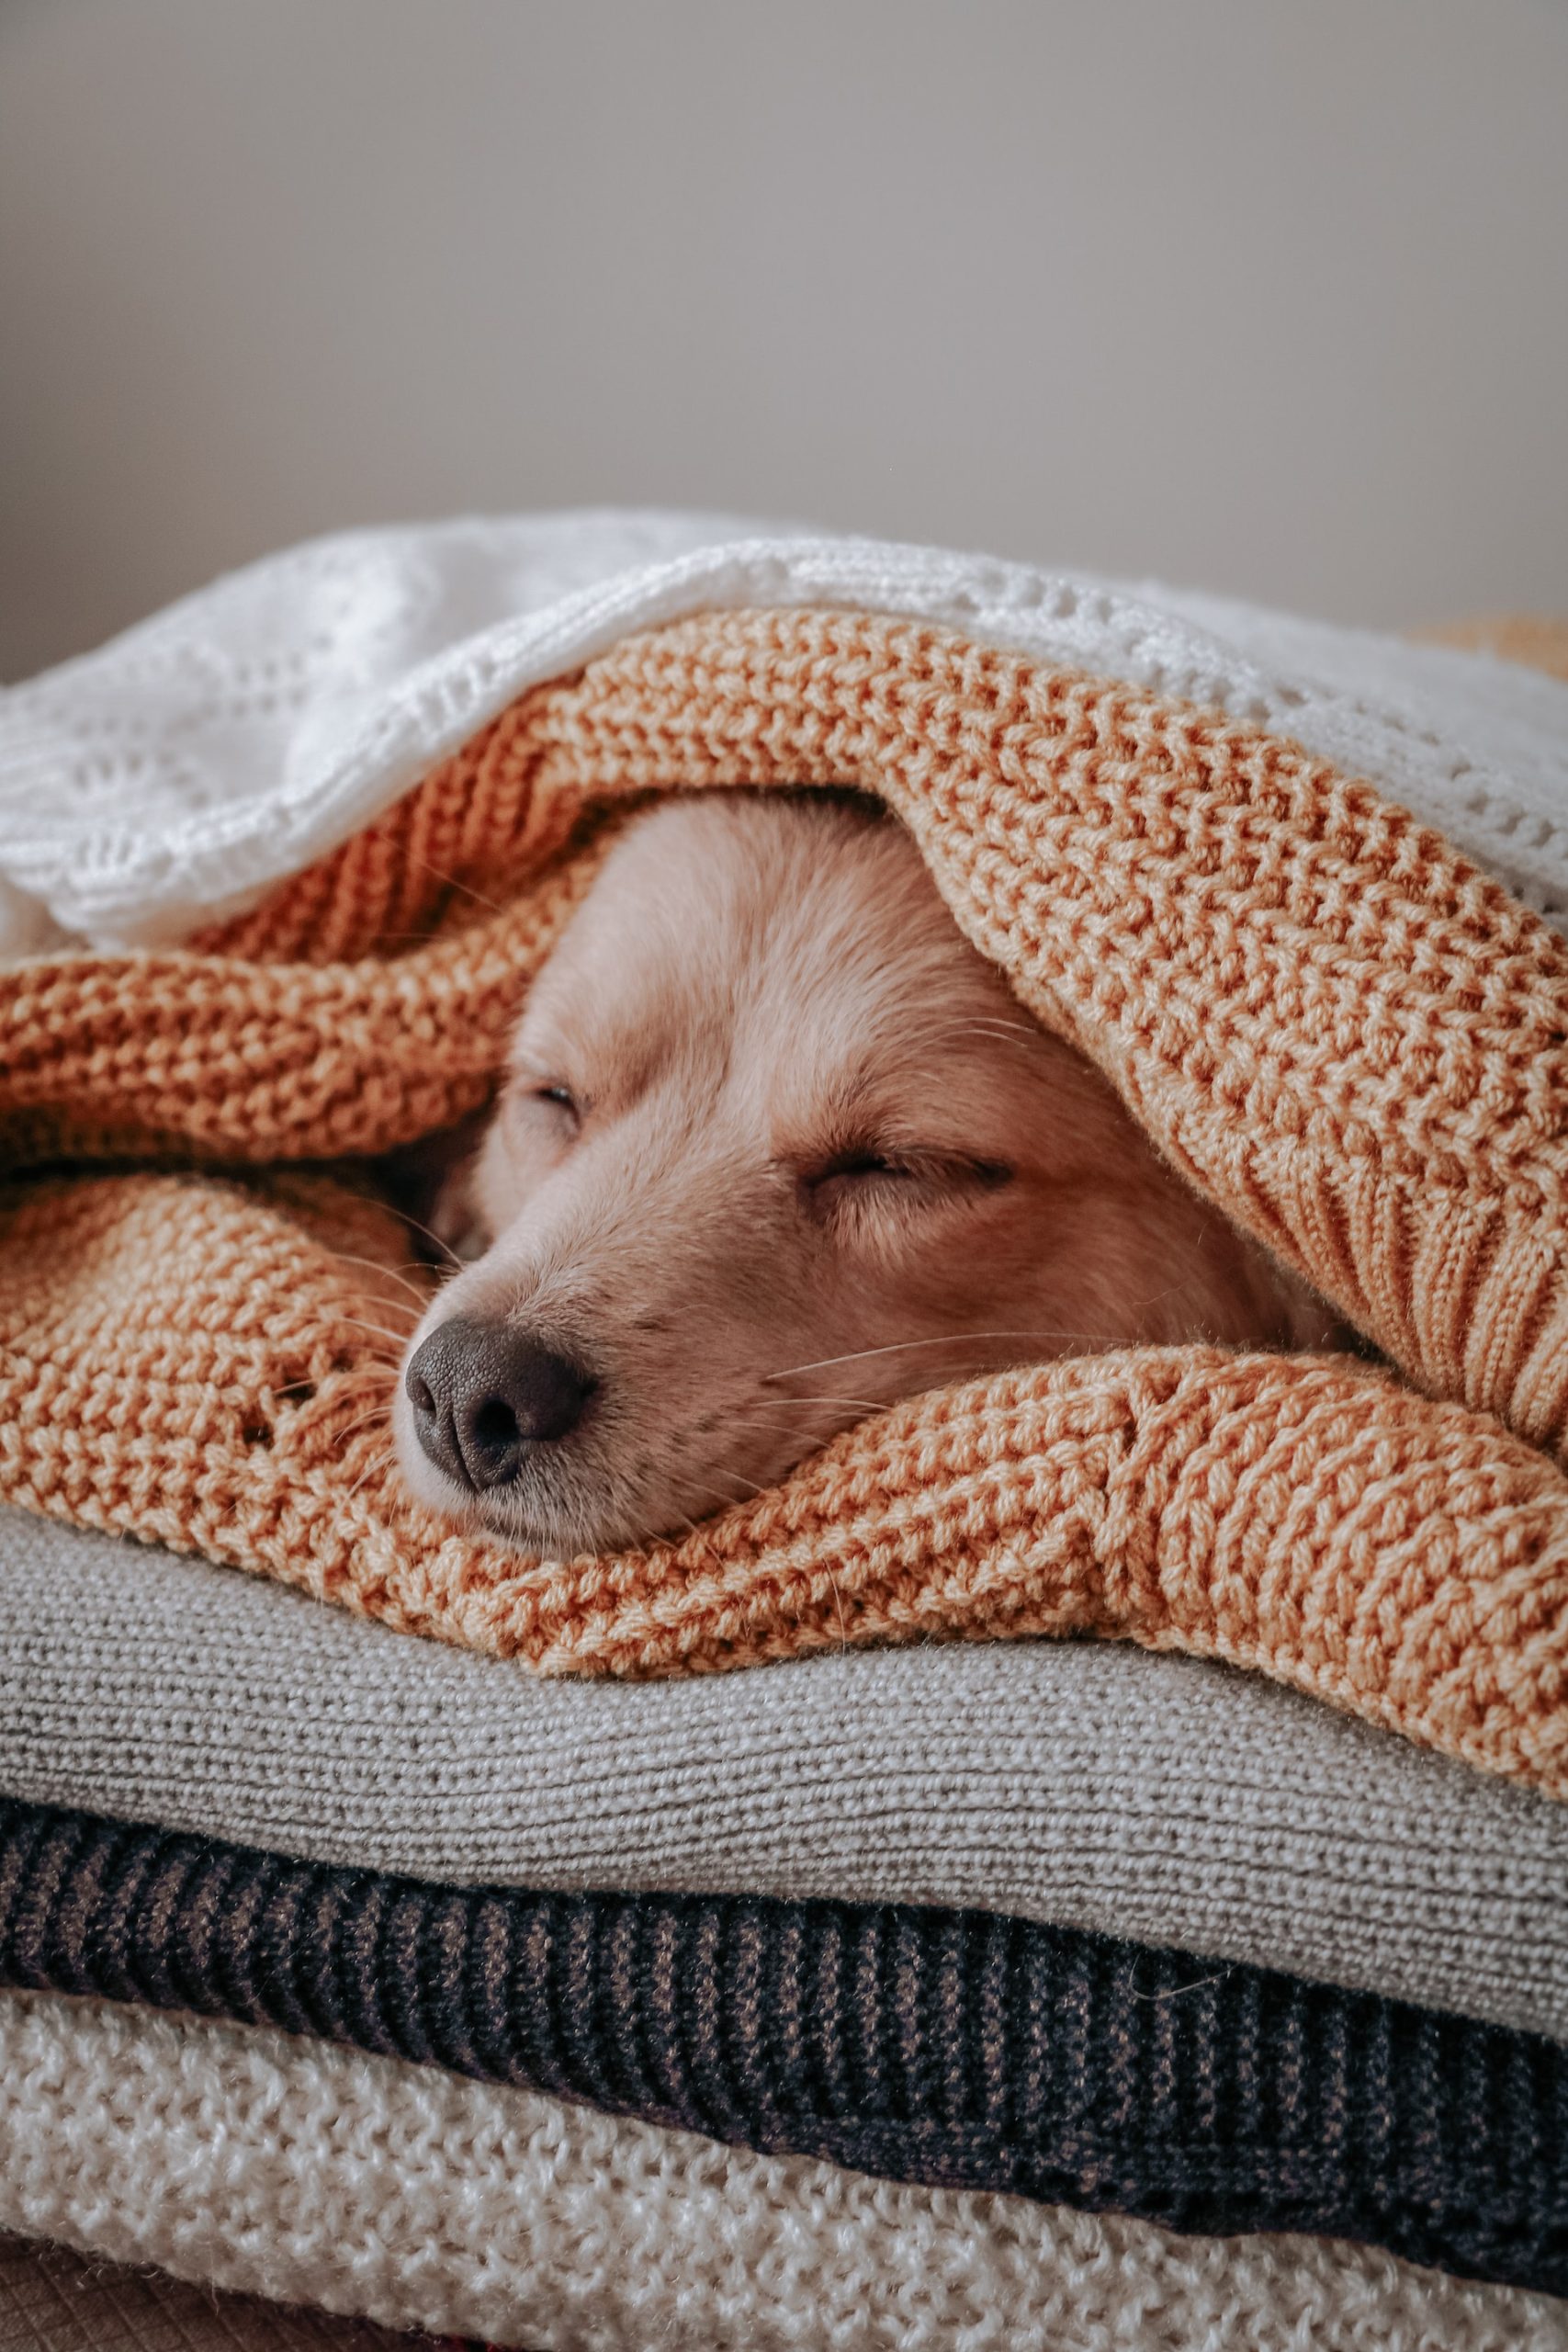 A puppy sleeping in-between a stack of blankets. Image by Sdf Rahbar from Unsplash.  